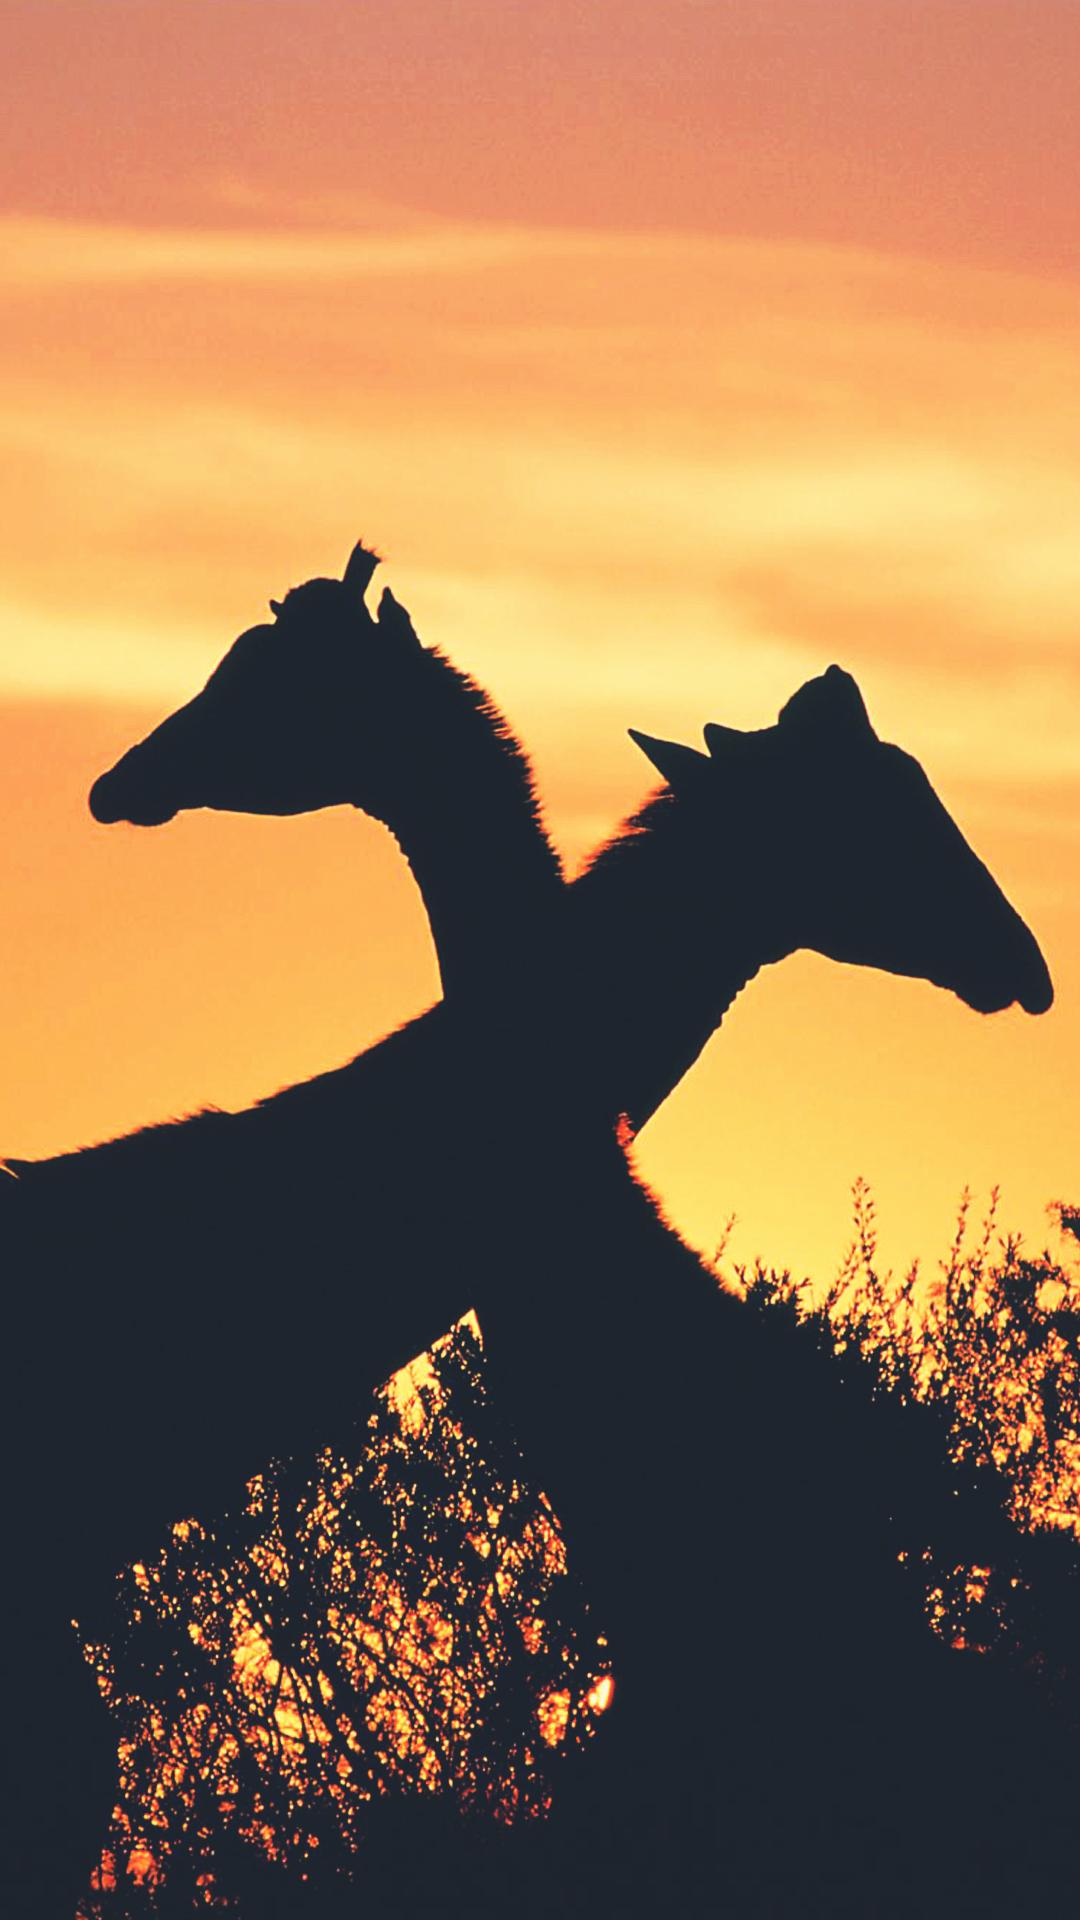 Giraffe Love Africa Sunset Android Wallpapers free download